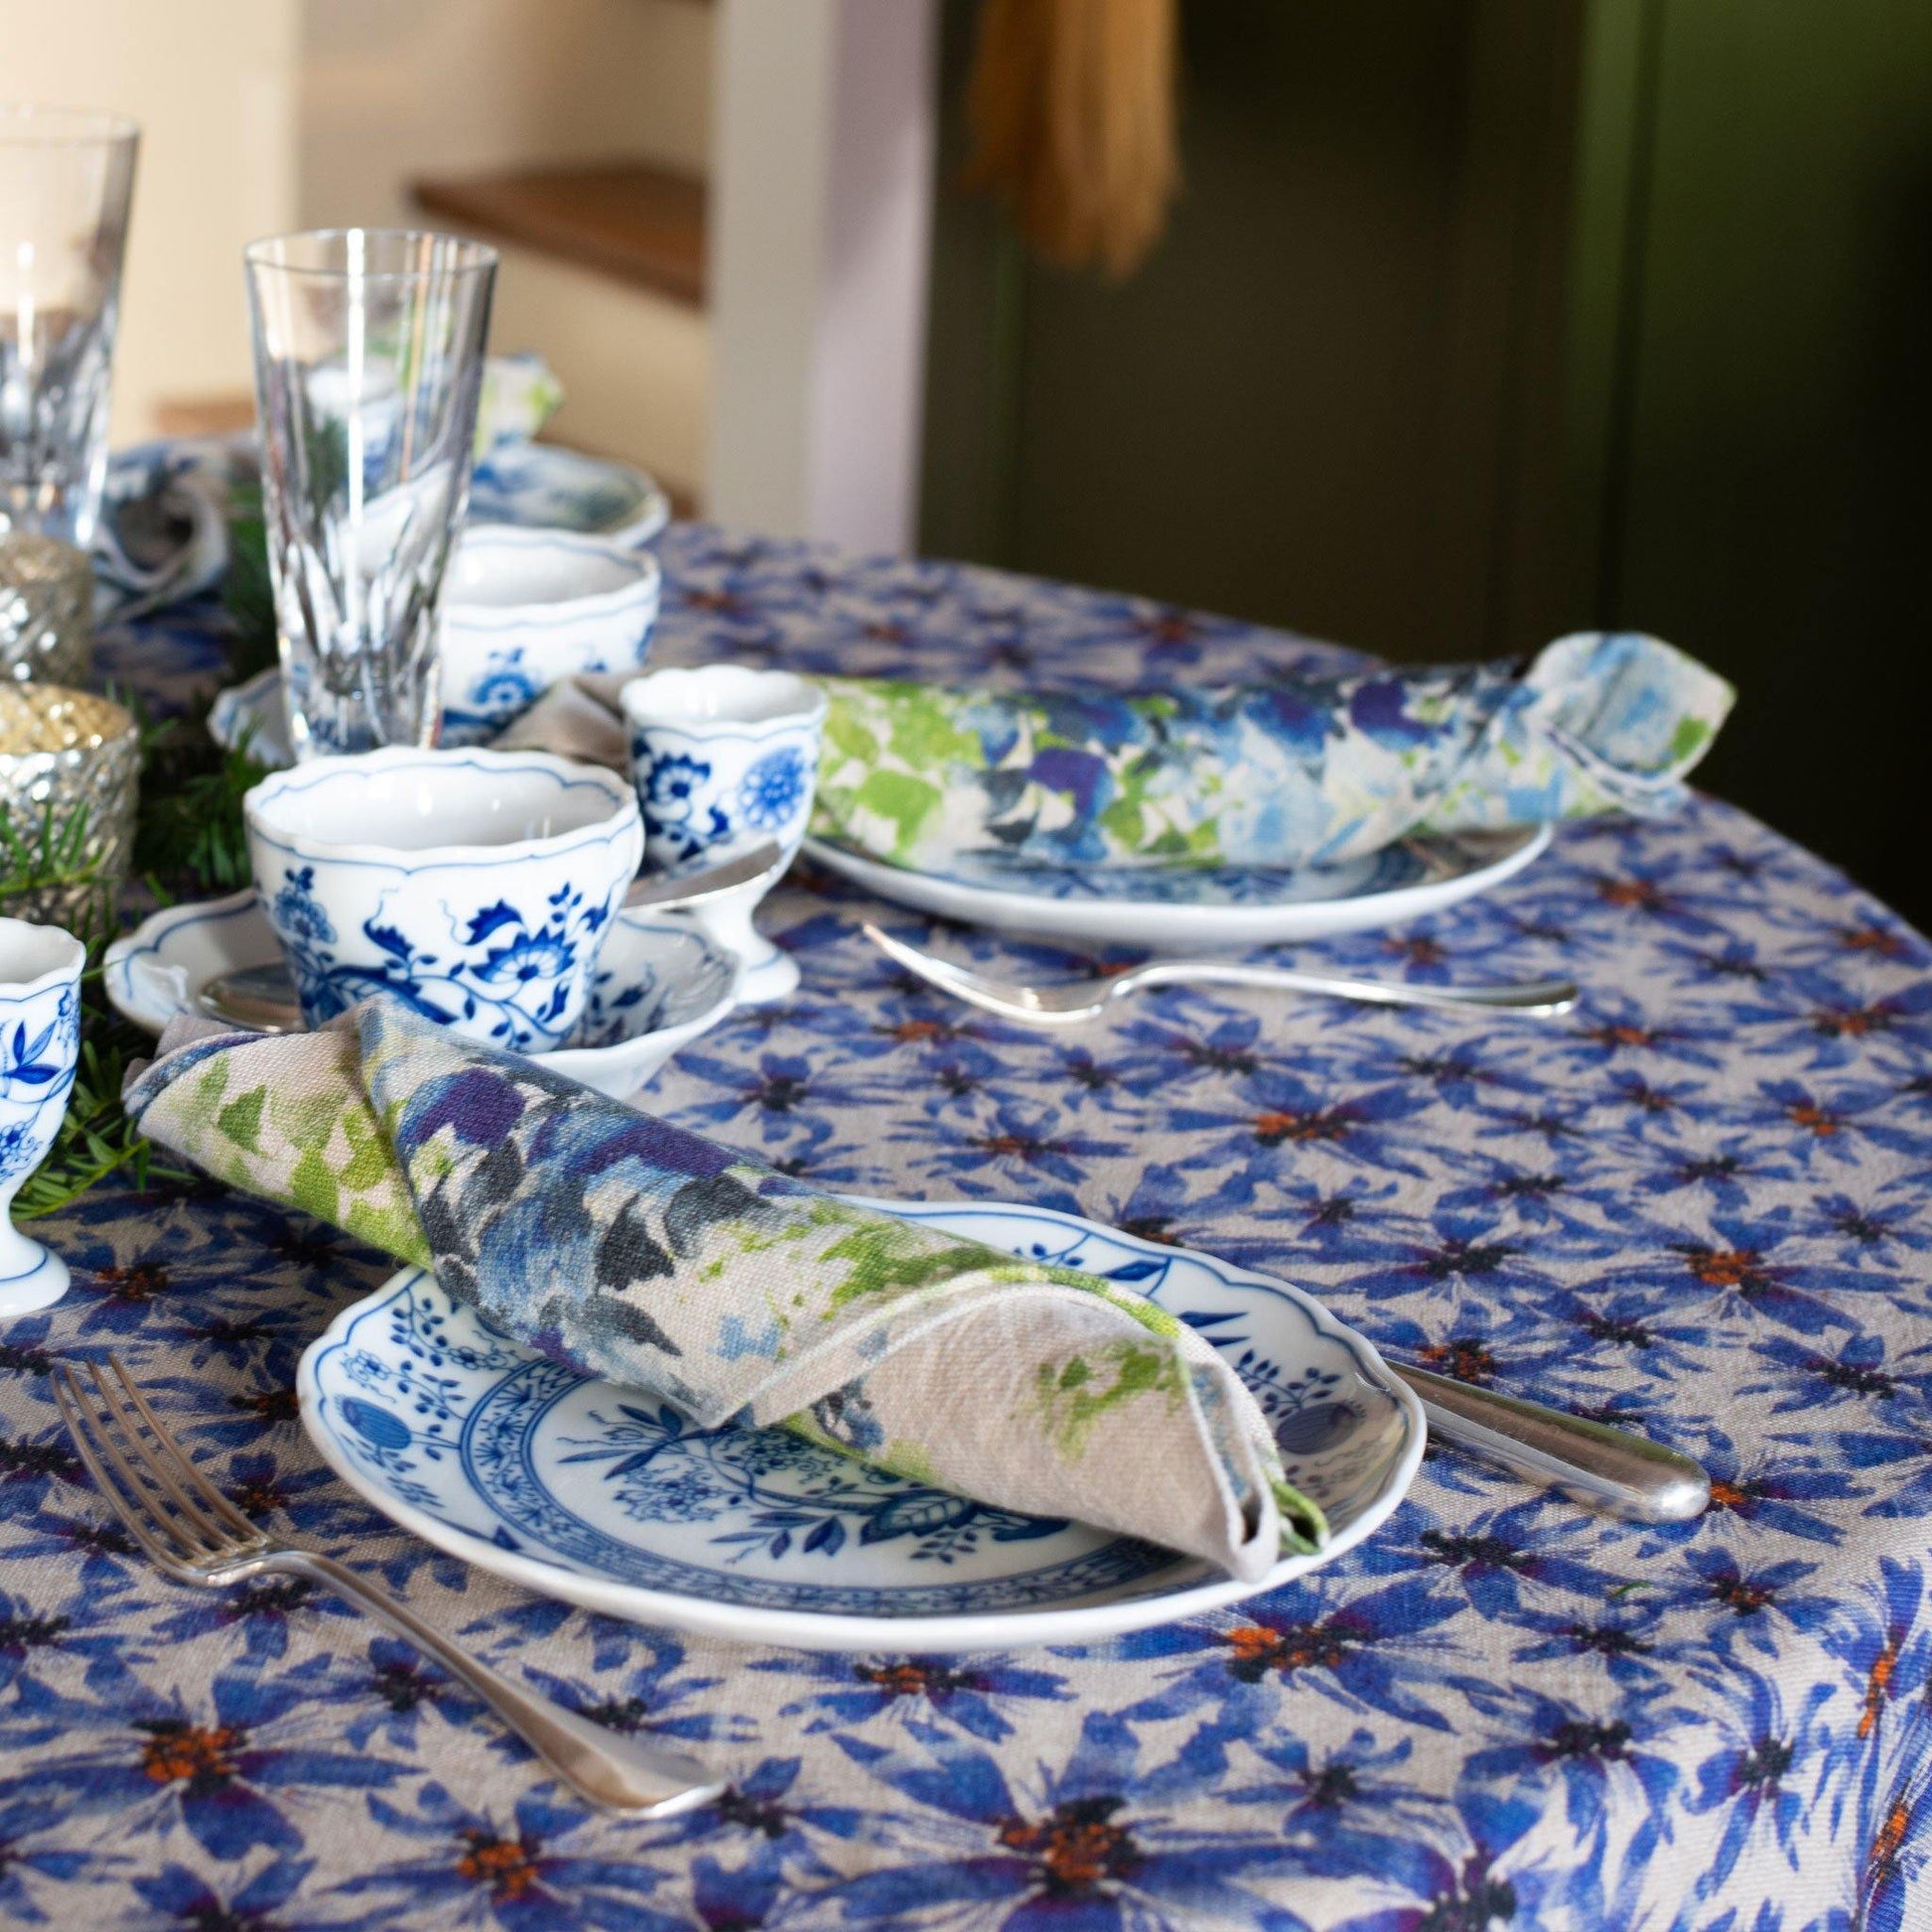 Blue flower printed linen table cloth setting with blue and white china and blue and green linen napkin.